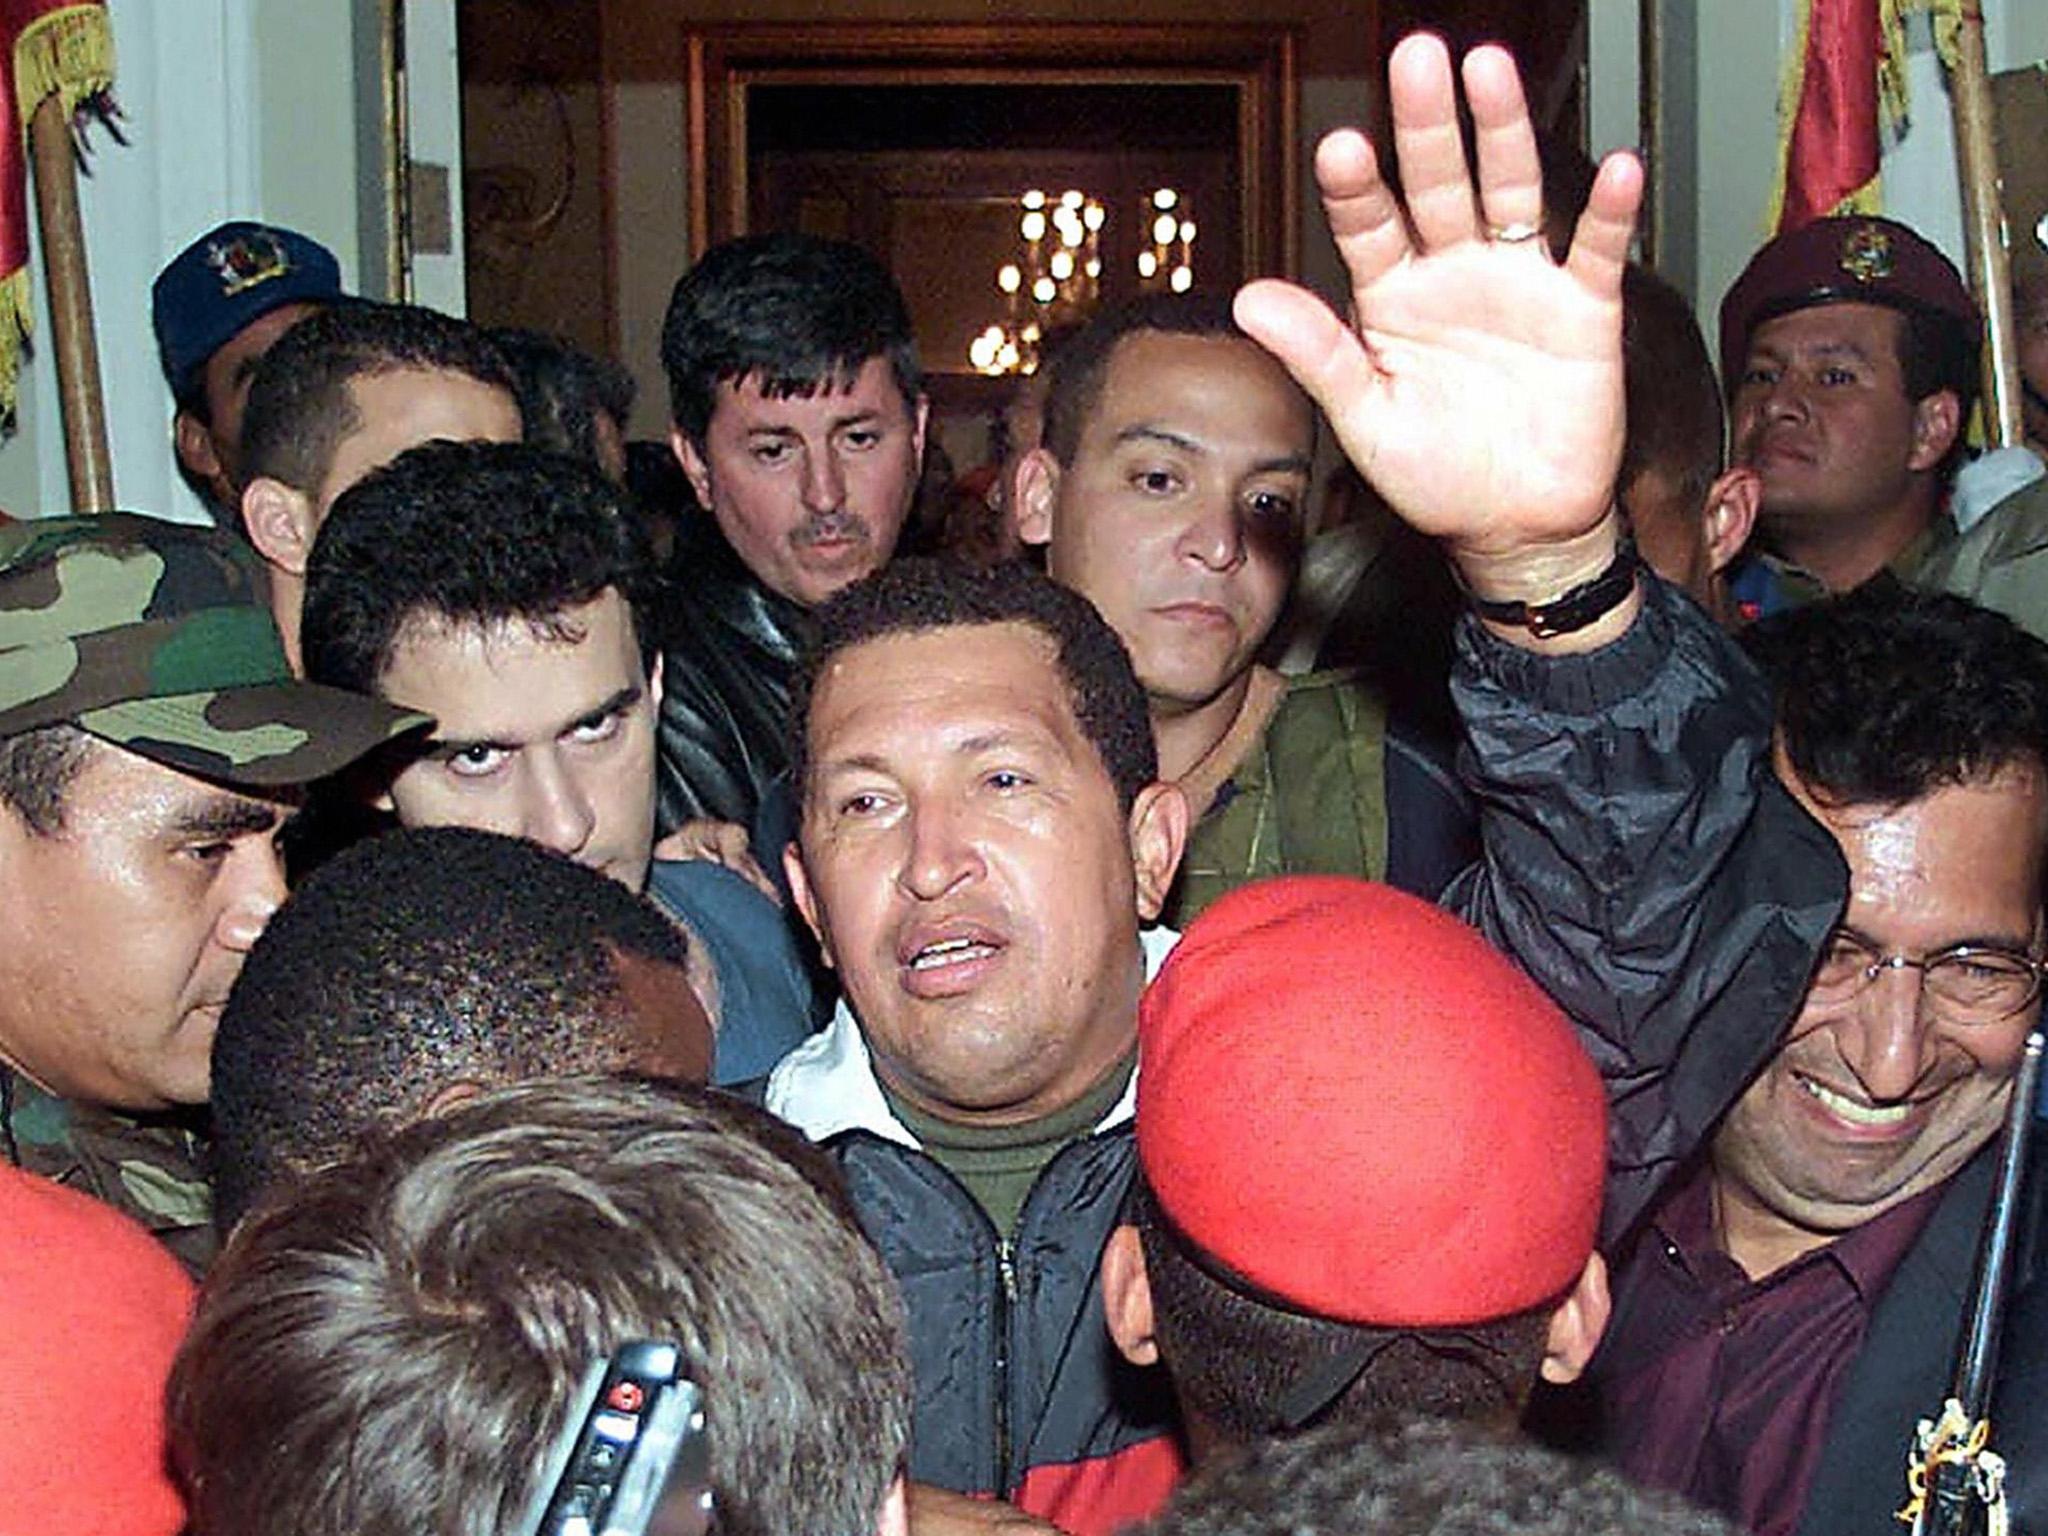 Hugo Chavez greeted by supporters upon his return to the presidential palace after the failed putsch against him in 2002